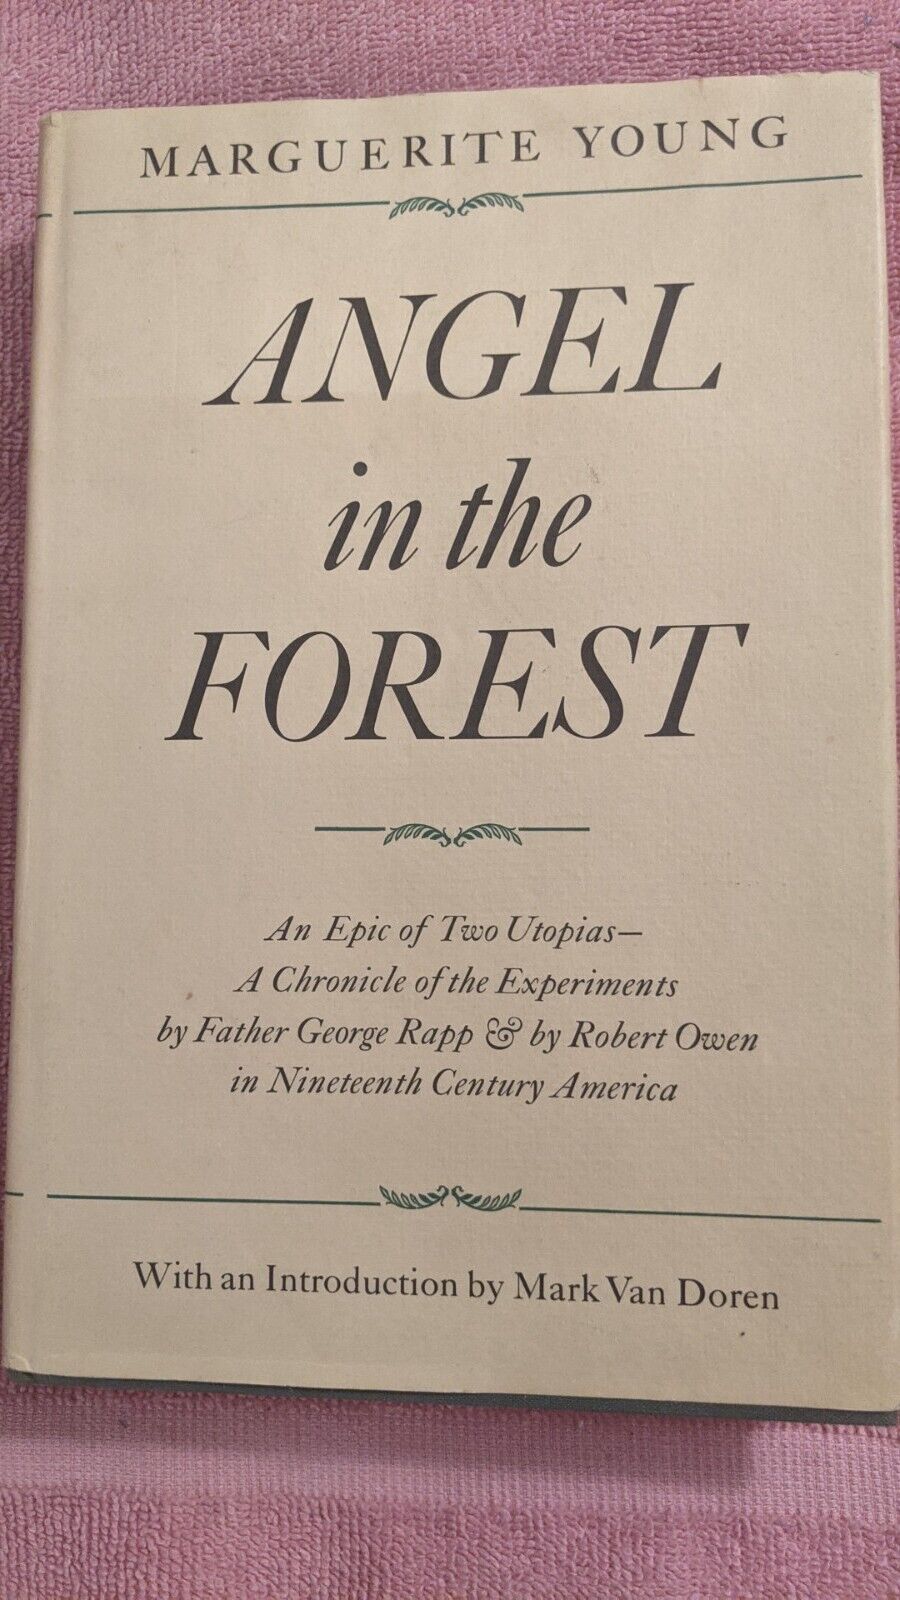 Marguerite Young, ANGEL IN THE FOREST, Scribners, 1966, HB, DJ, Two Utopias